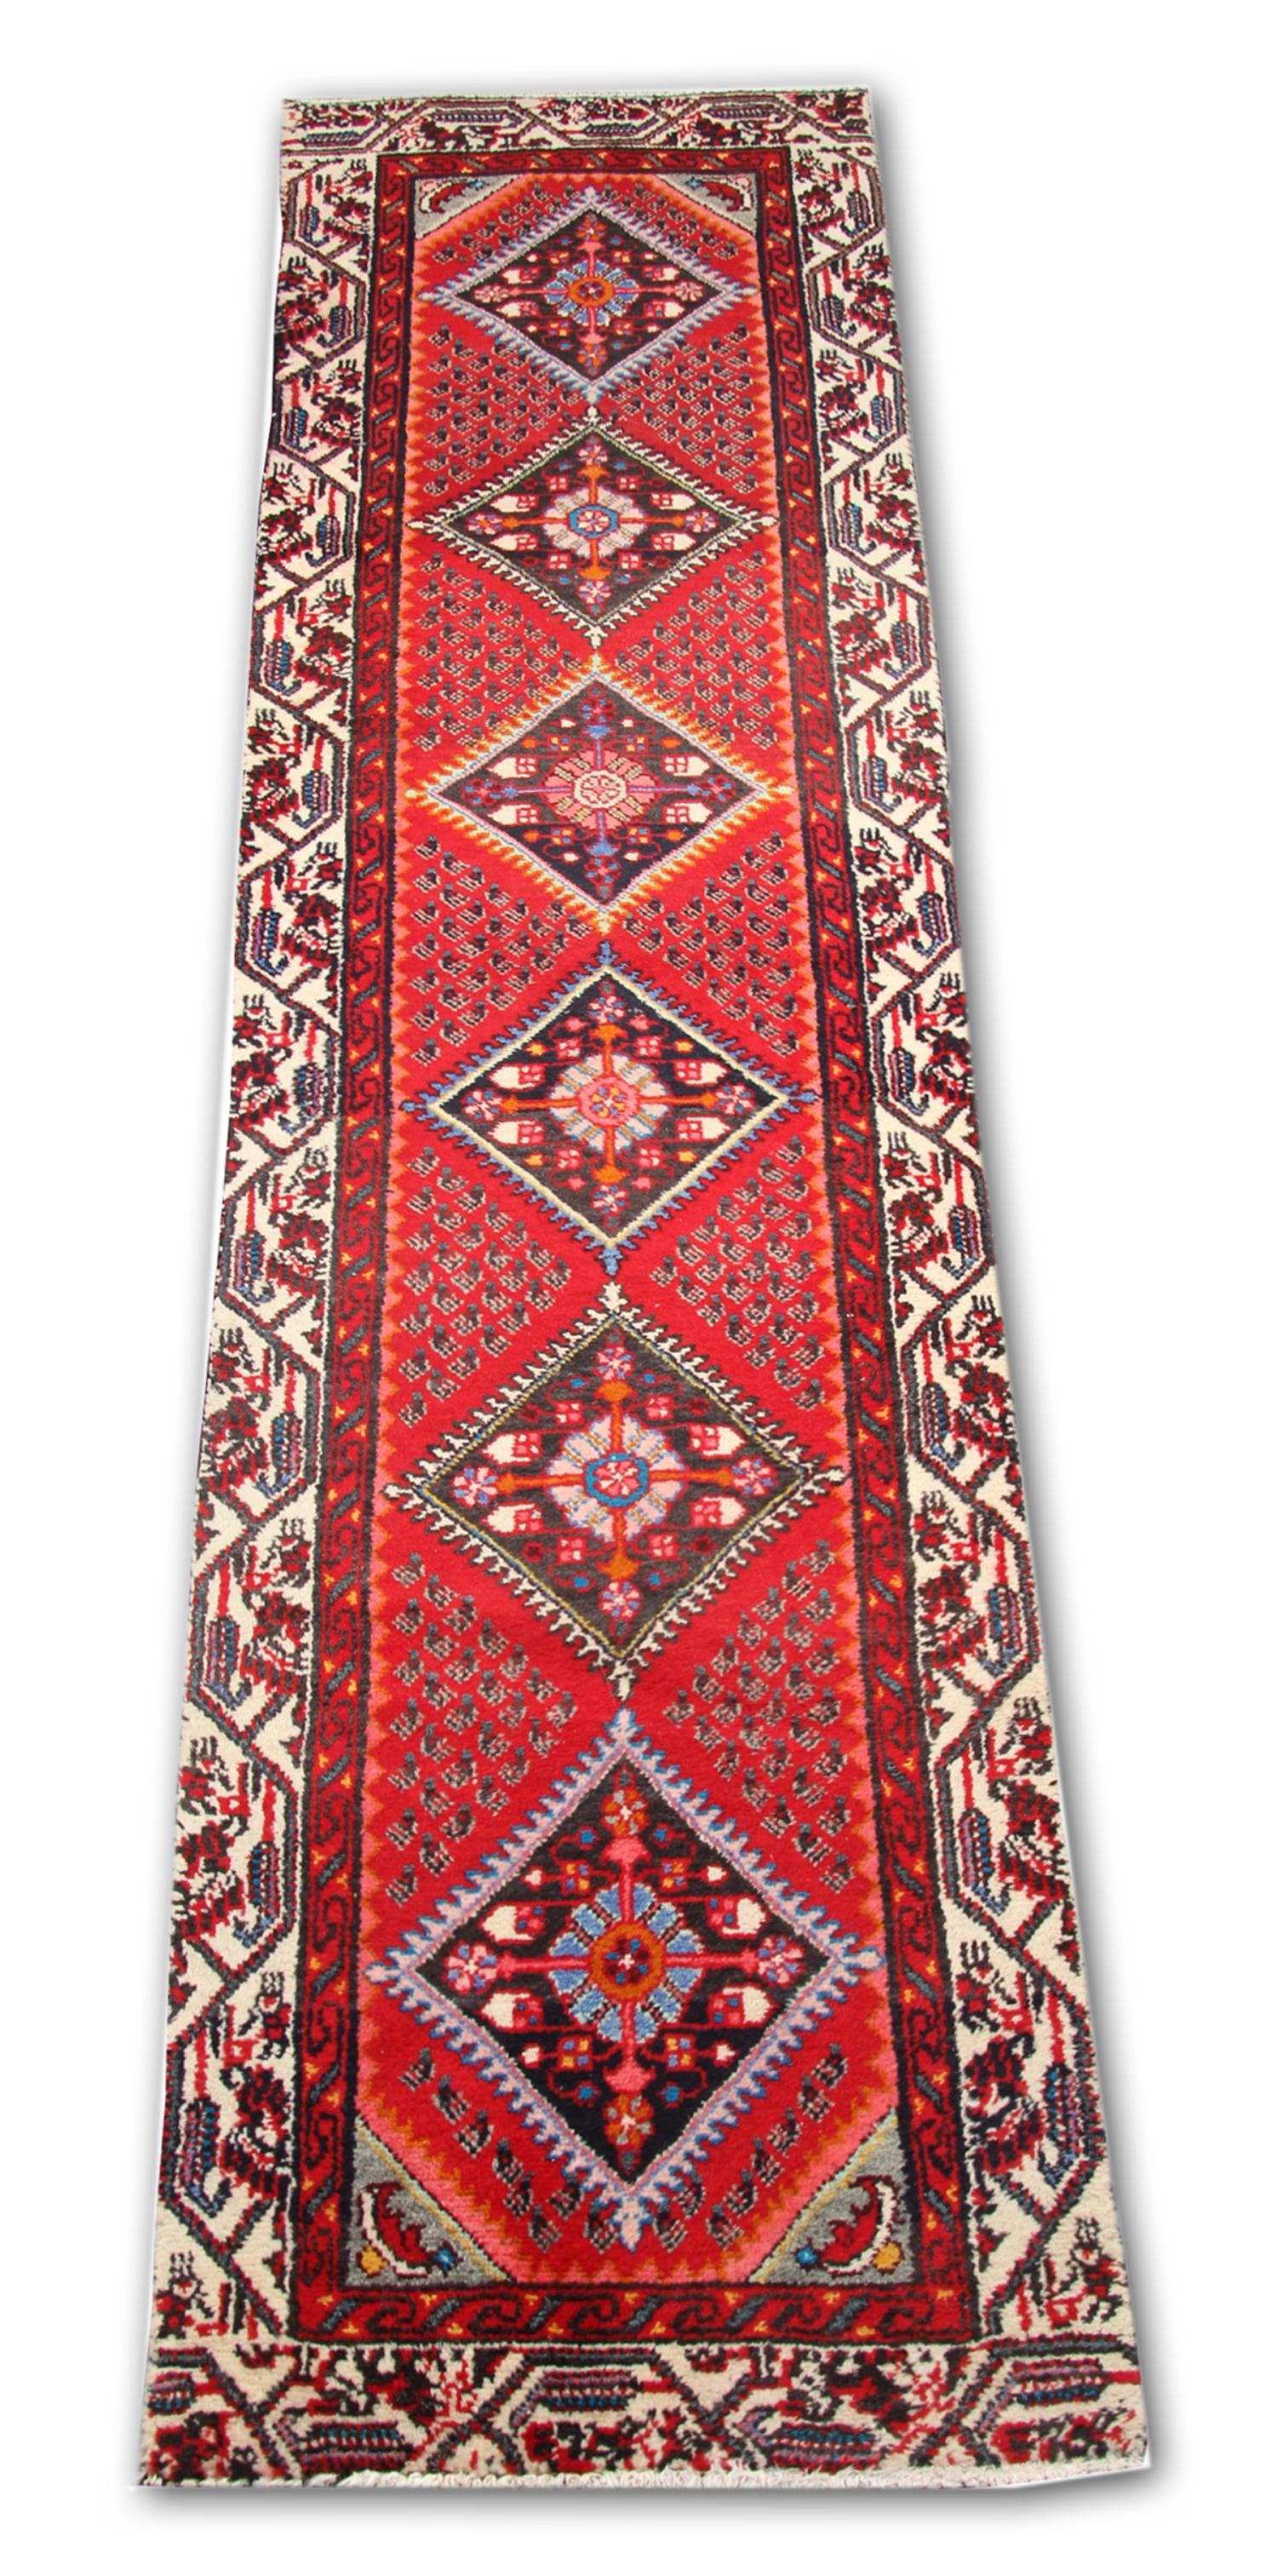 This vintage rug was constructed by hand with fine organic materials. Woven with a traditional design and colour palette. It features a rich red background and highly decorative medallion design through the centre and a repeat motif border. This